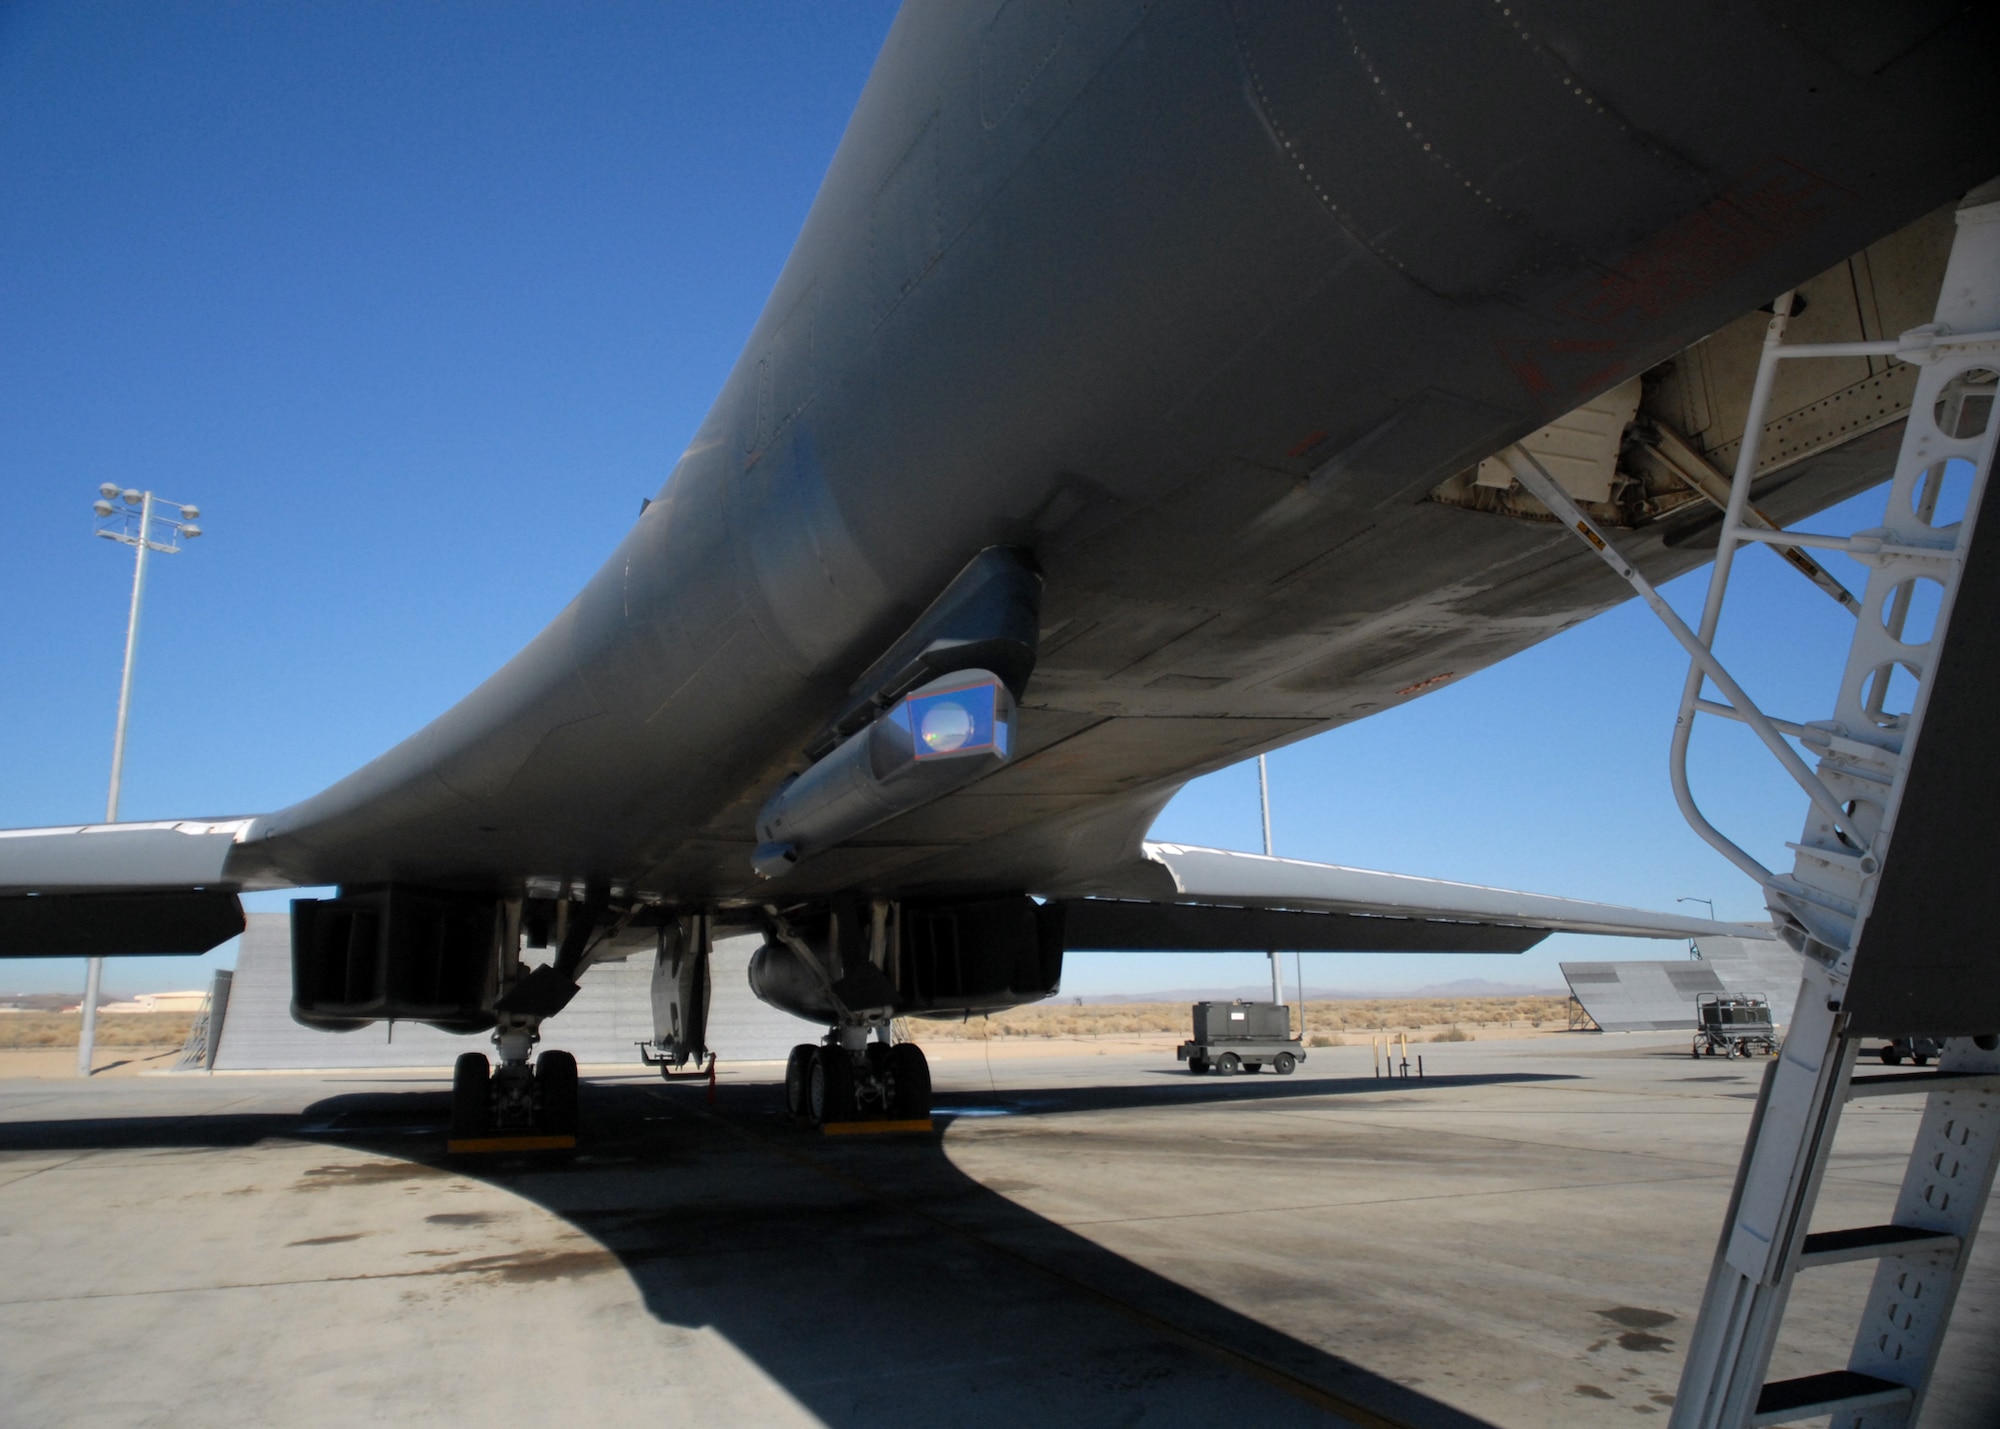 A pod positioned under the fuselage of a B-1B bomber was the part of the focus of a test conducted Nov. 15 by the 419th Flight Test Squadron and Global Power Bomber Combined Test Force and the 337th Test and Evaluation Squadron, Dyess AFB, Texas. The test completed the Laptop Controlled Targeting Pod Phase II upgrade to the B-1. The upgrade gives the aircraft new capabilities including a reduced timeline to find and strike moving targets in close air support of ground troops. (U.S Air Force photo by Kate Blais)